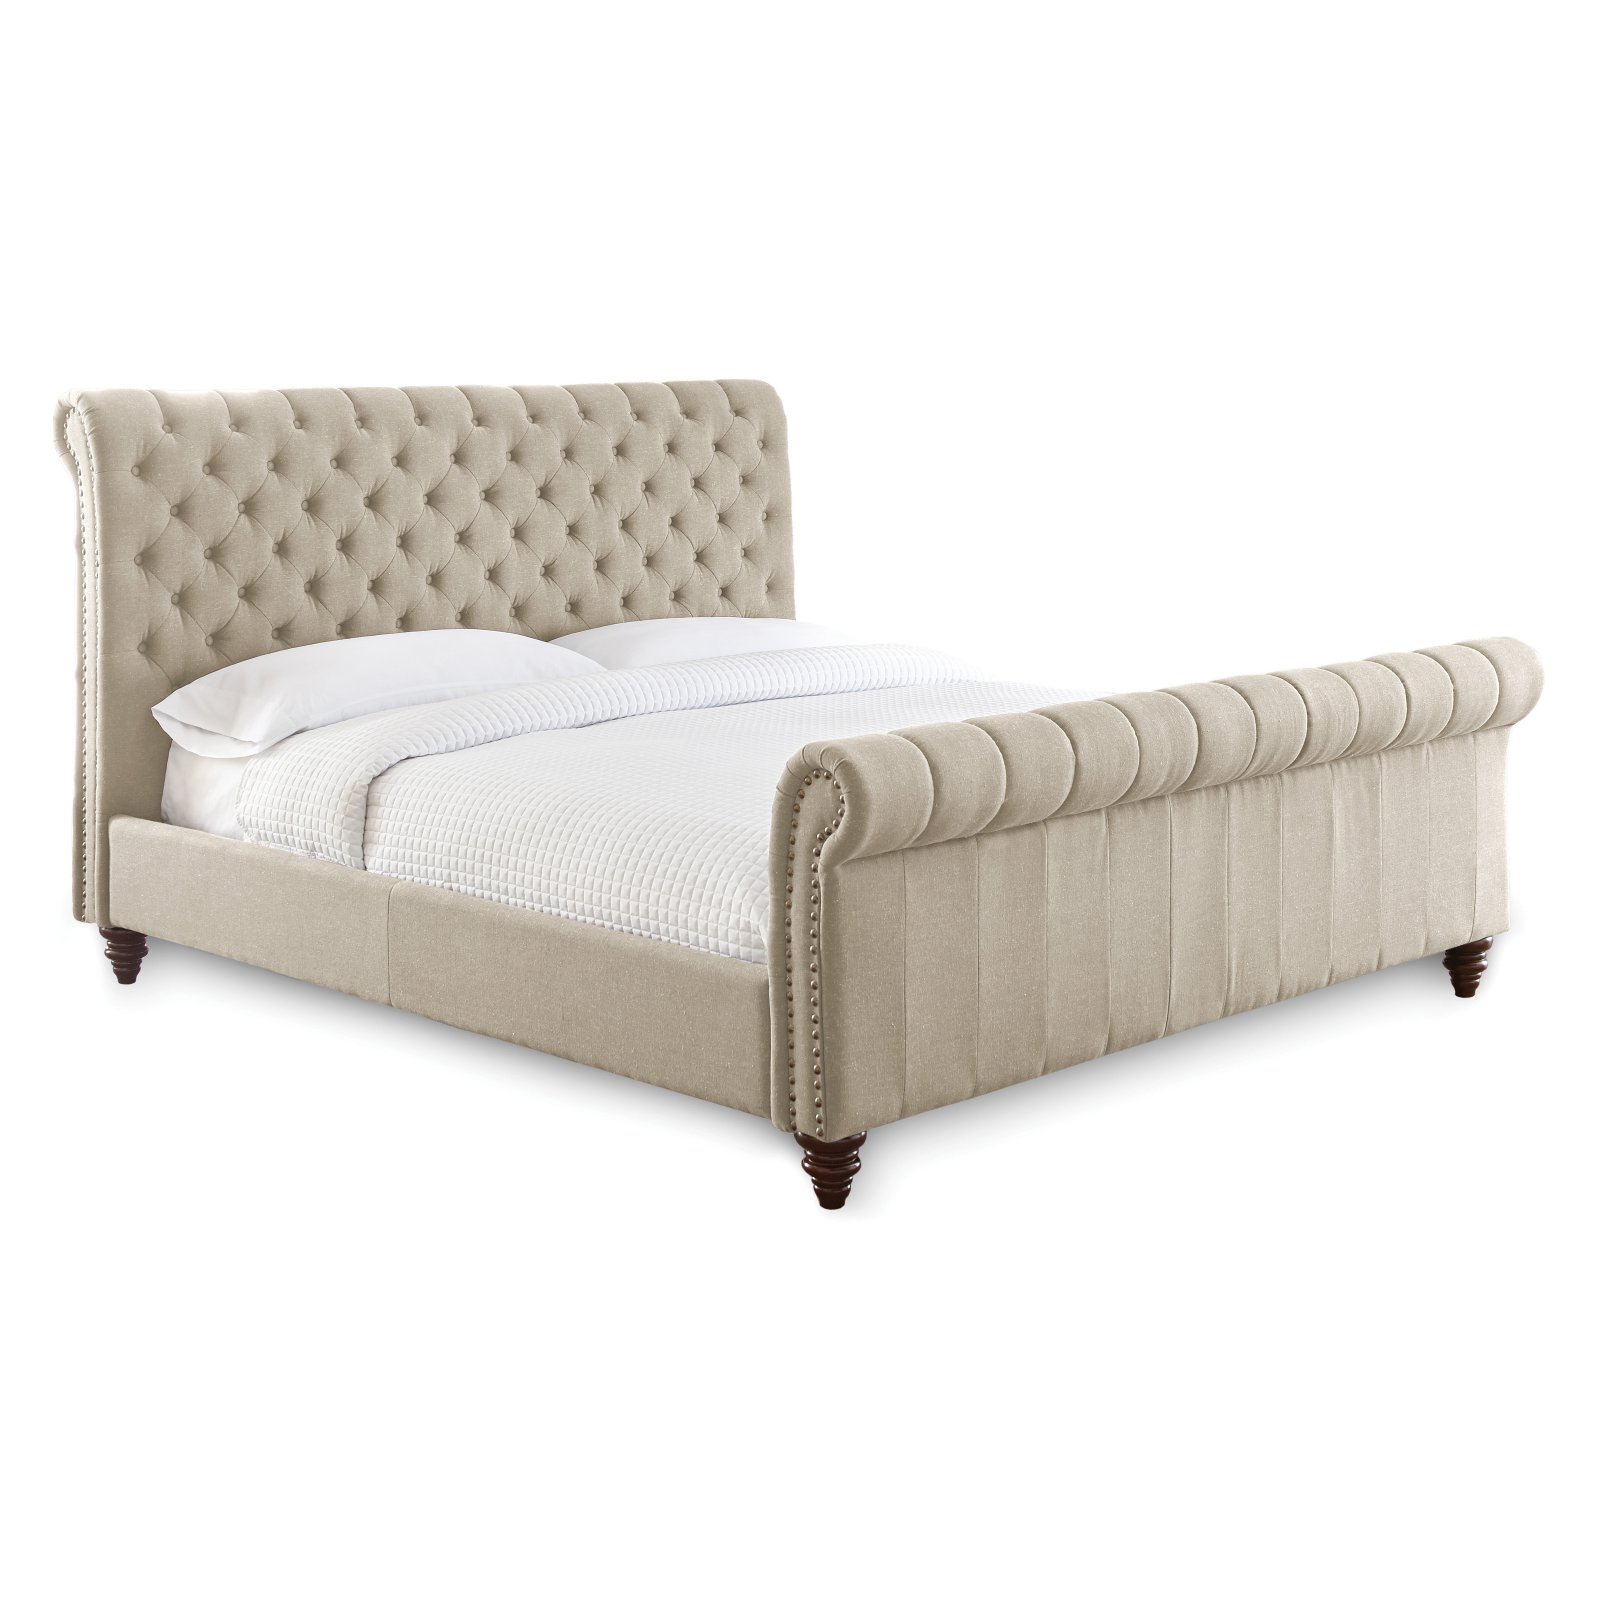 Swanson Tufted King Sleigh Bed in Sand Beige Upholstery - image 3 of 10